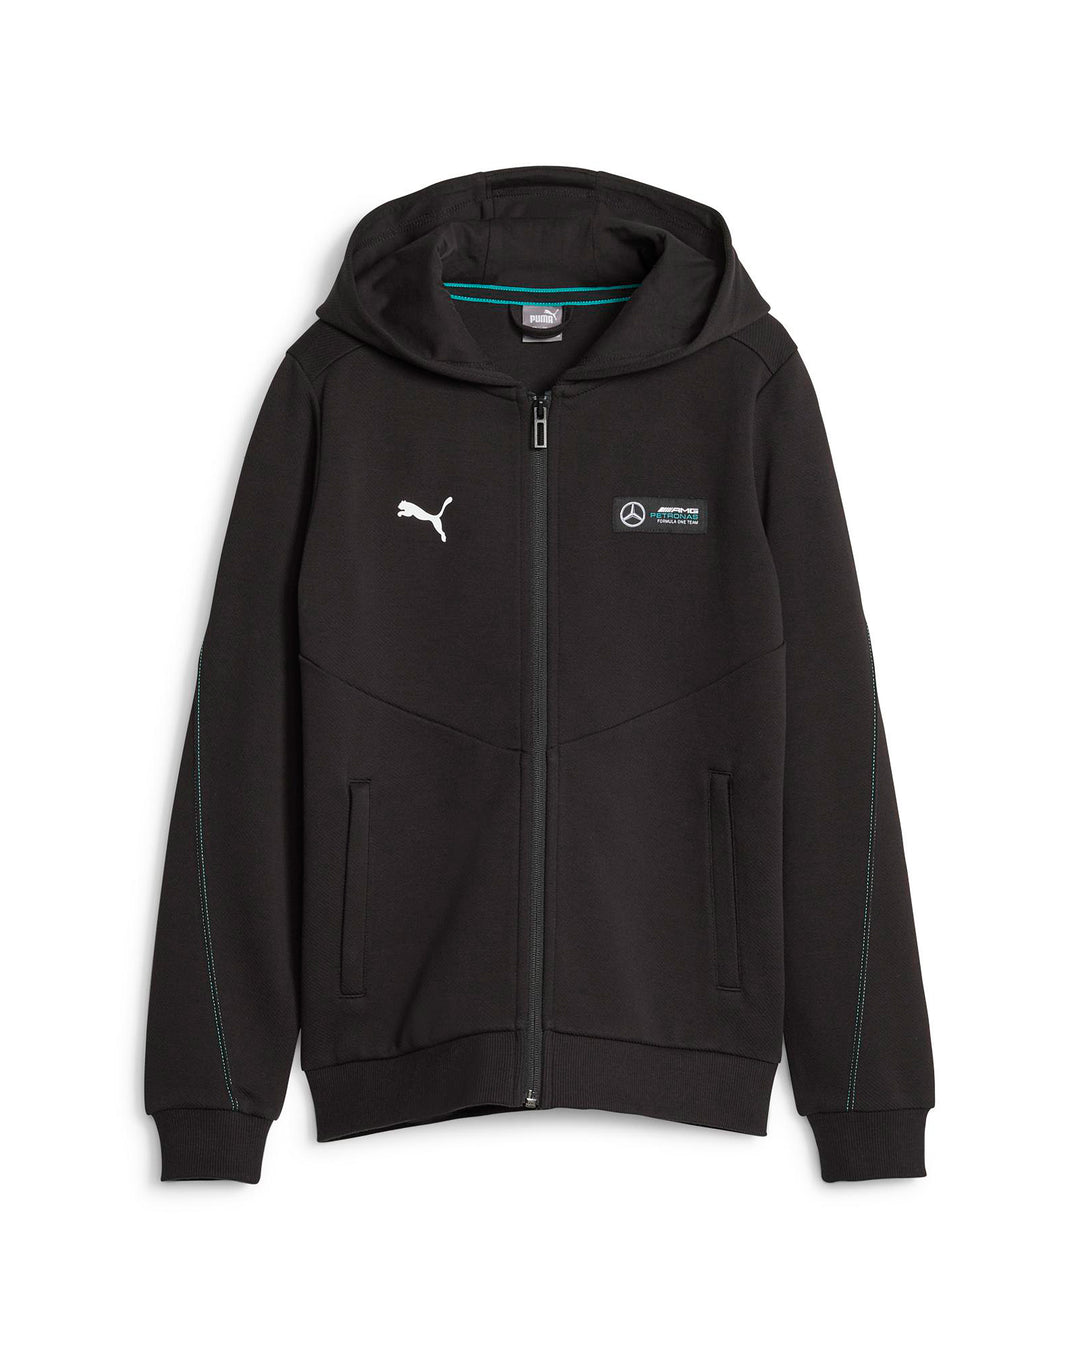 Fan Jackets | Official Mercedes-AMG F1 Store